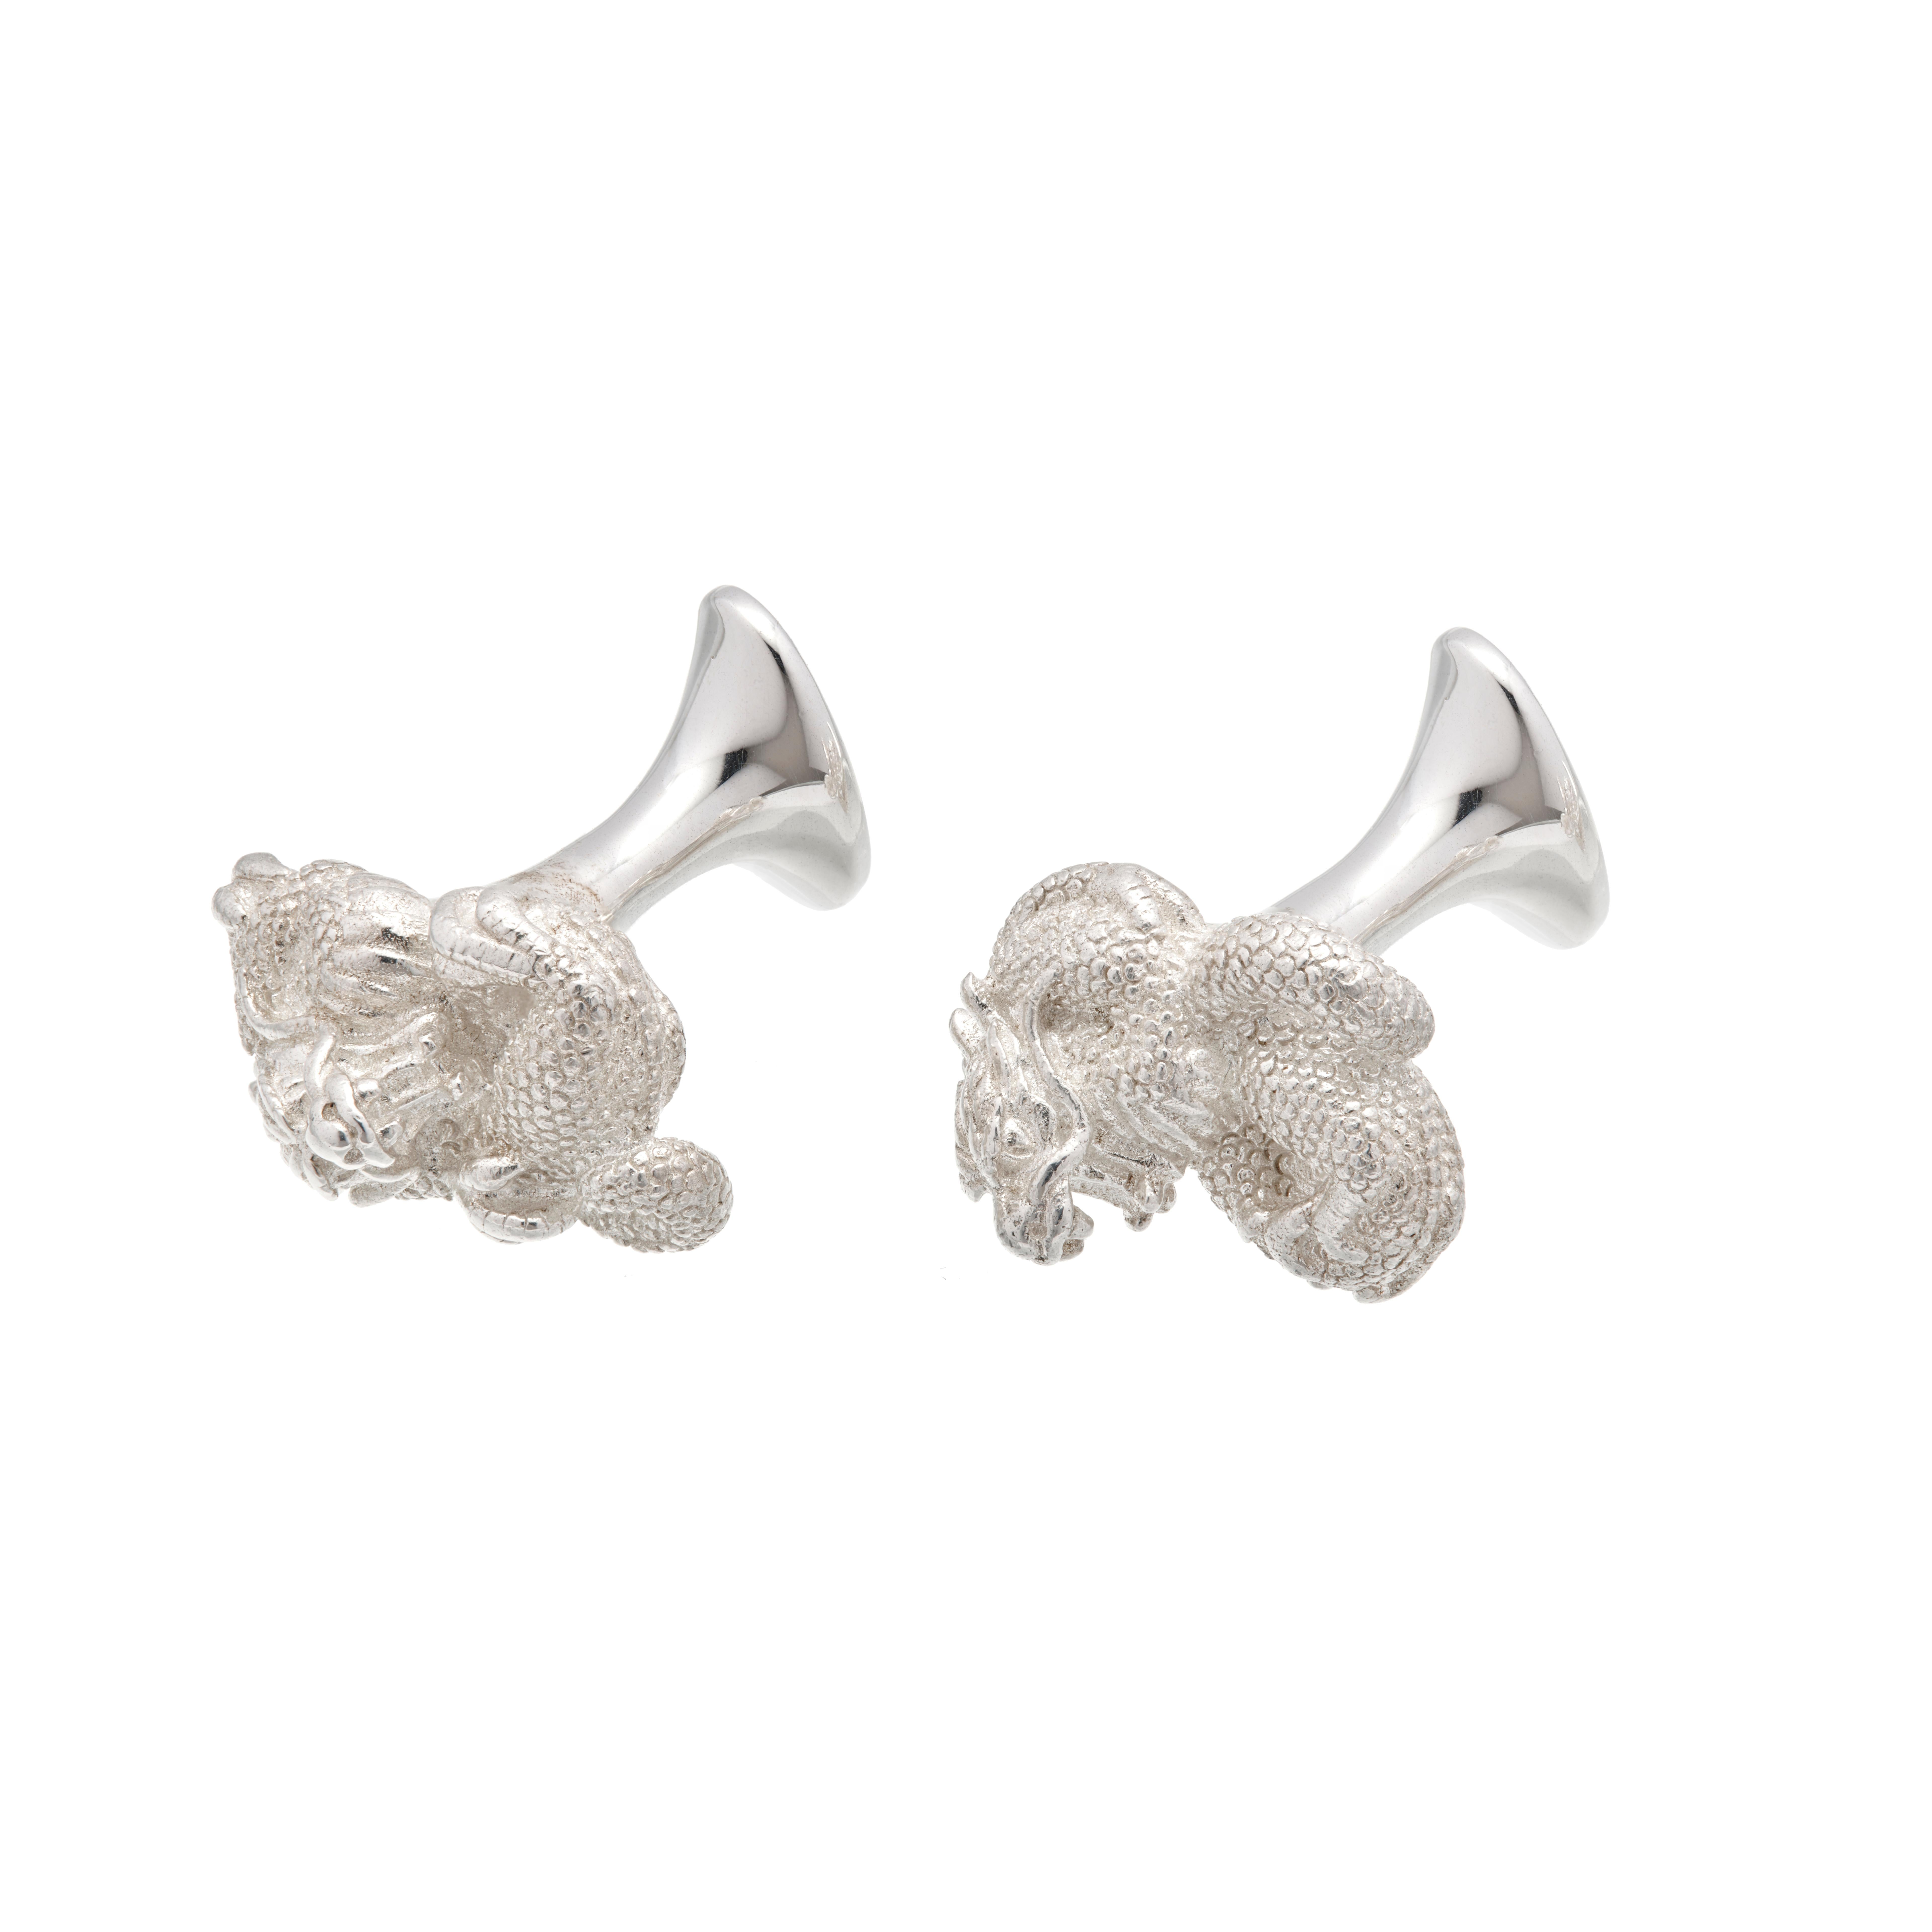 Simon Harrison Chinese Zodiac Sterling Silver Dragon Cufflinks In New Condition For Sale In London, GB